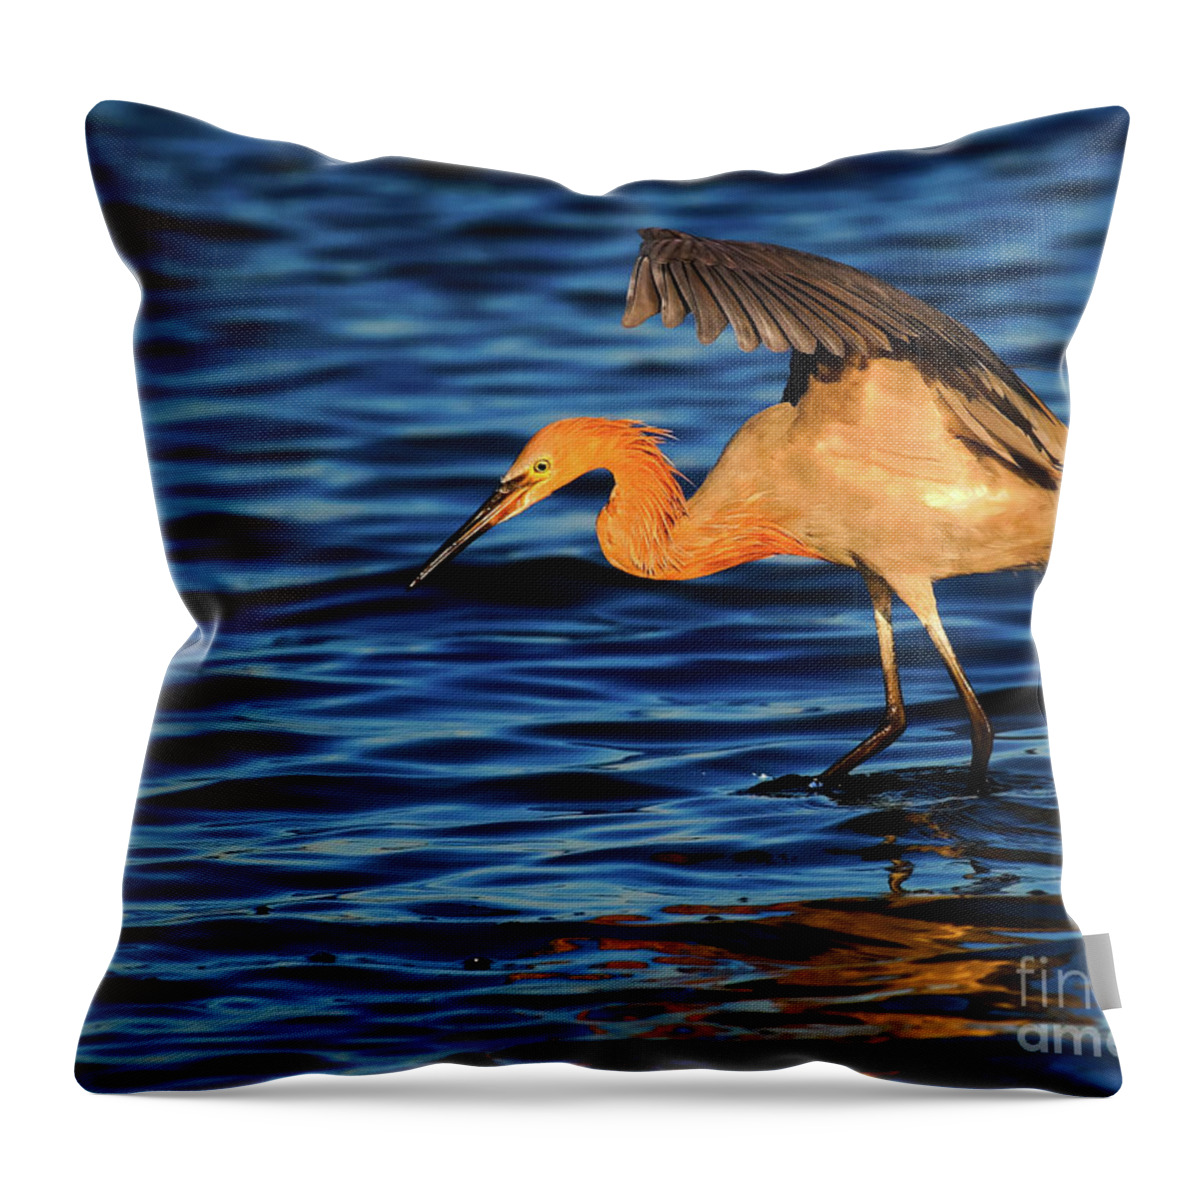 Reddish Egret Throw Pillow featuring the photograph Reddish Egret Canopy In Blue by John F Tsumas